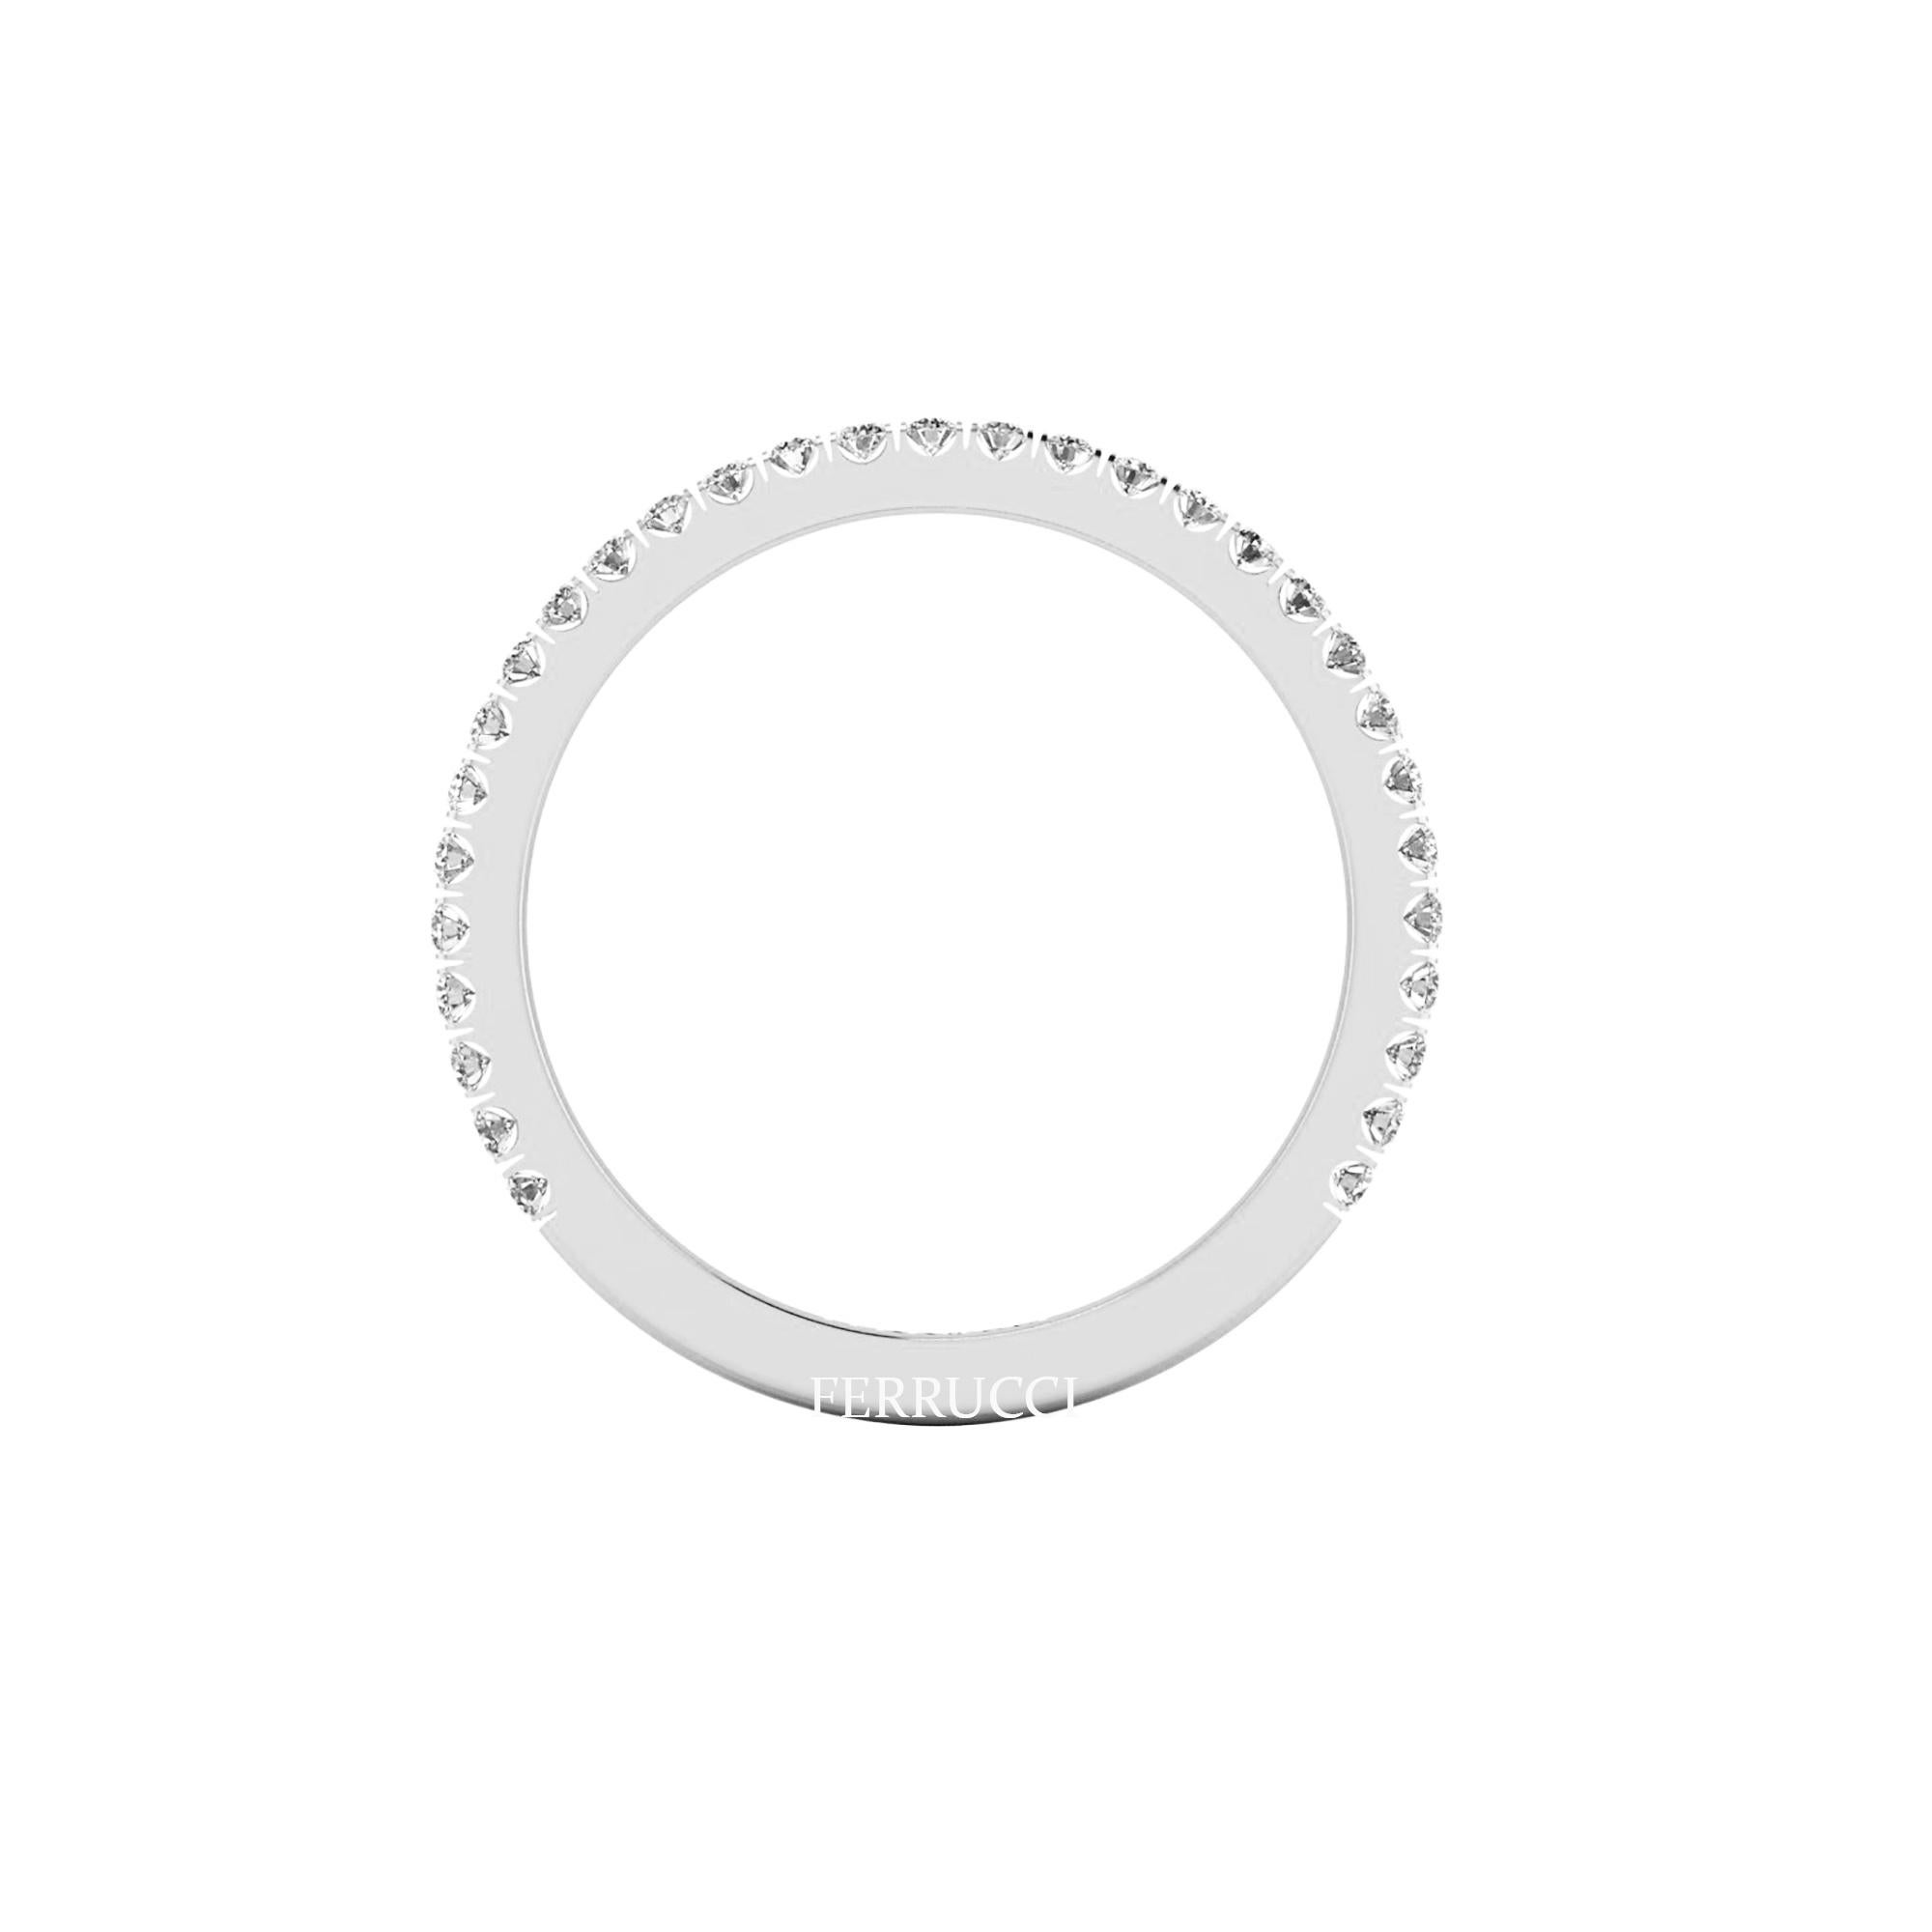 Platinum 950 thin band ring, stackable rings, with approximately 0.30 carat of white diamonds G color, VS clarity, hand set, comfortable fit, the band measure 1.5 mm width Wear single or multiple flat bands for different looks.
Custom orders